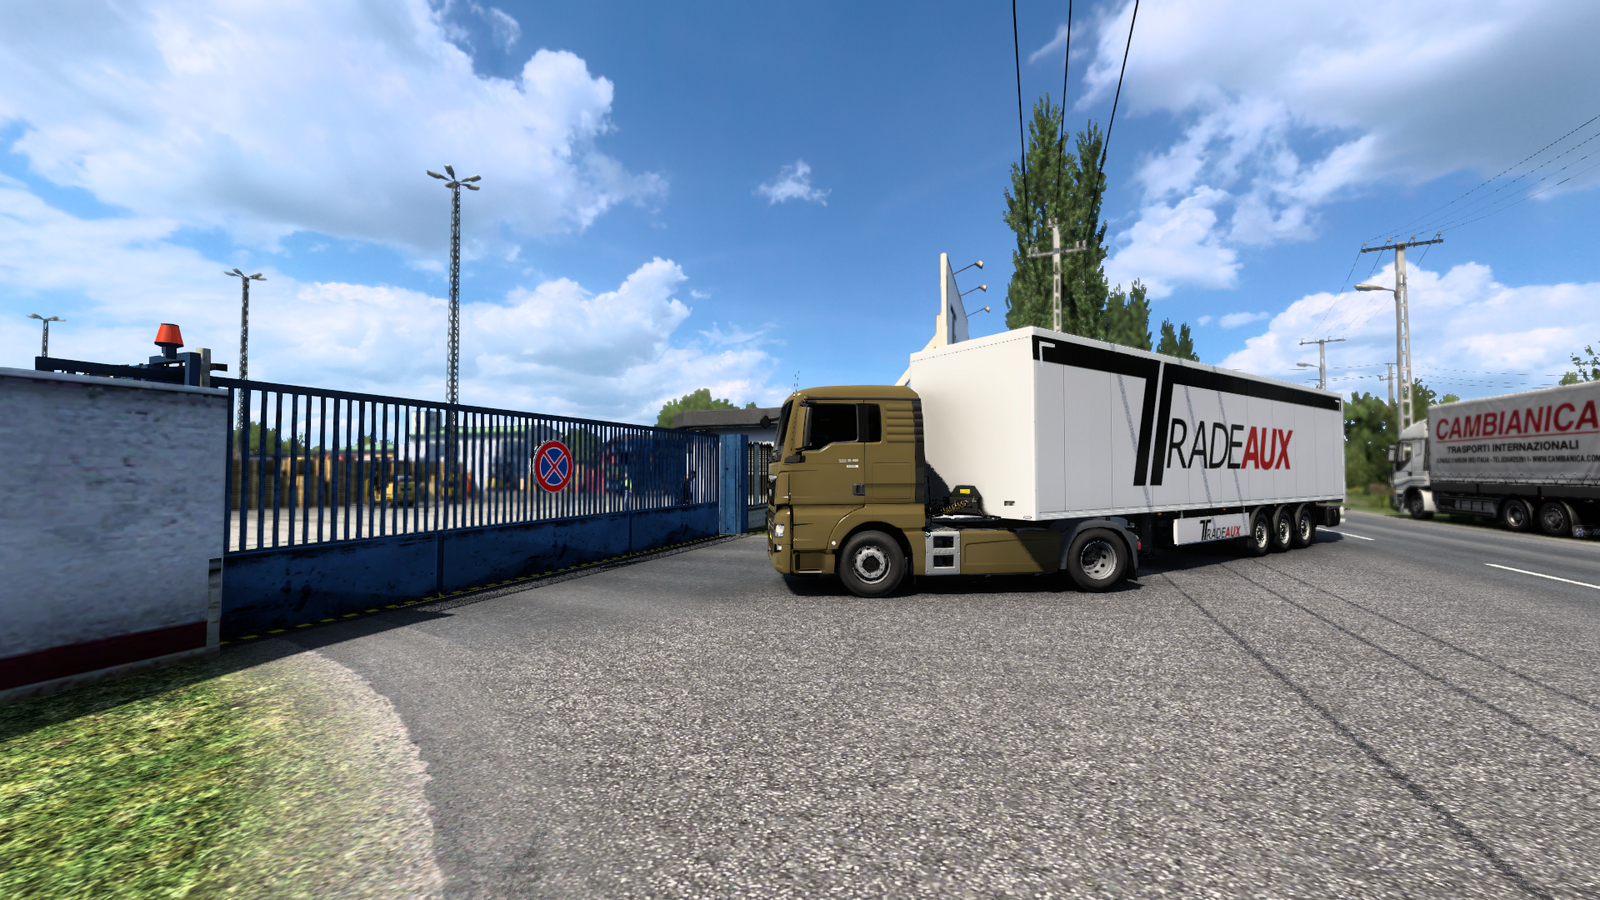 ets2_20221101_170736_00.png